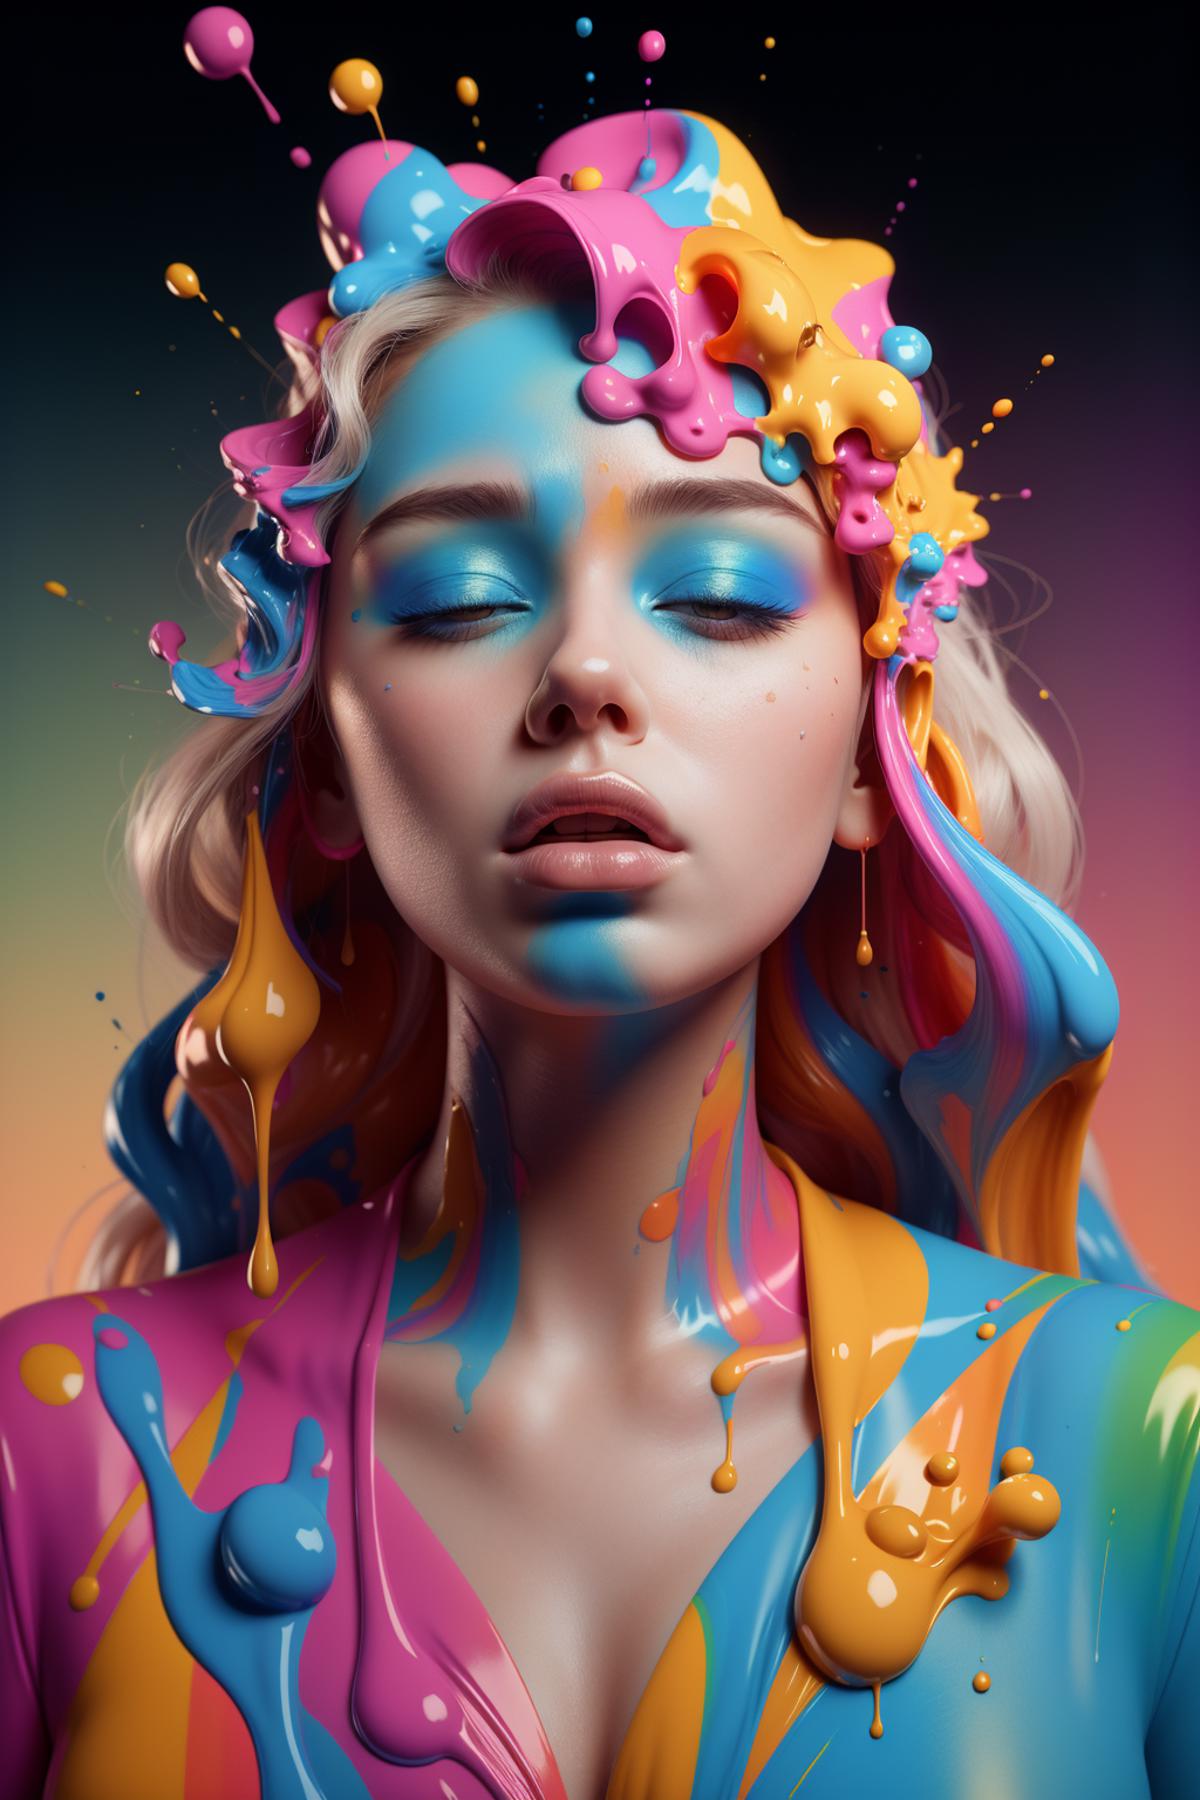 colorful face 霓颜 image by buffert